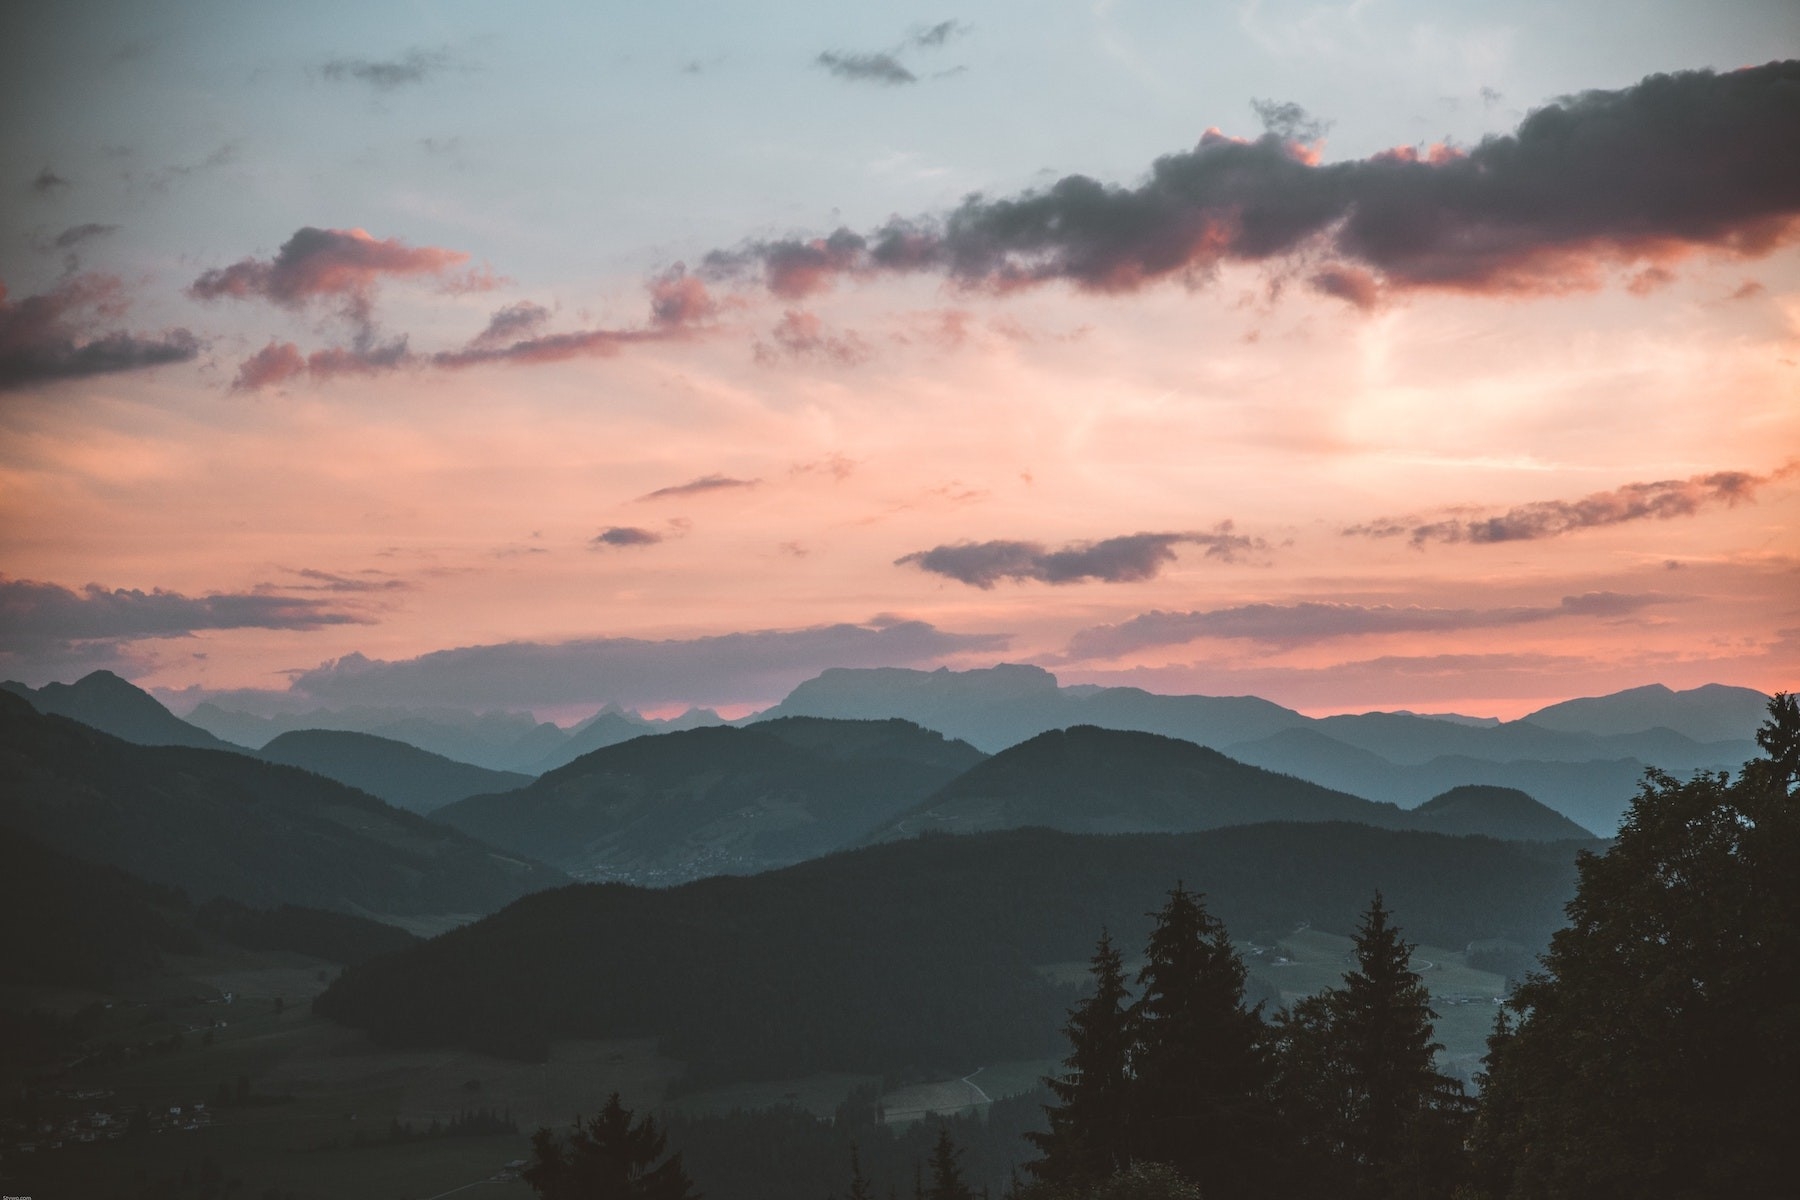 A sunset with mountains, trees and pink clouds